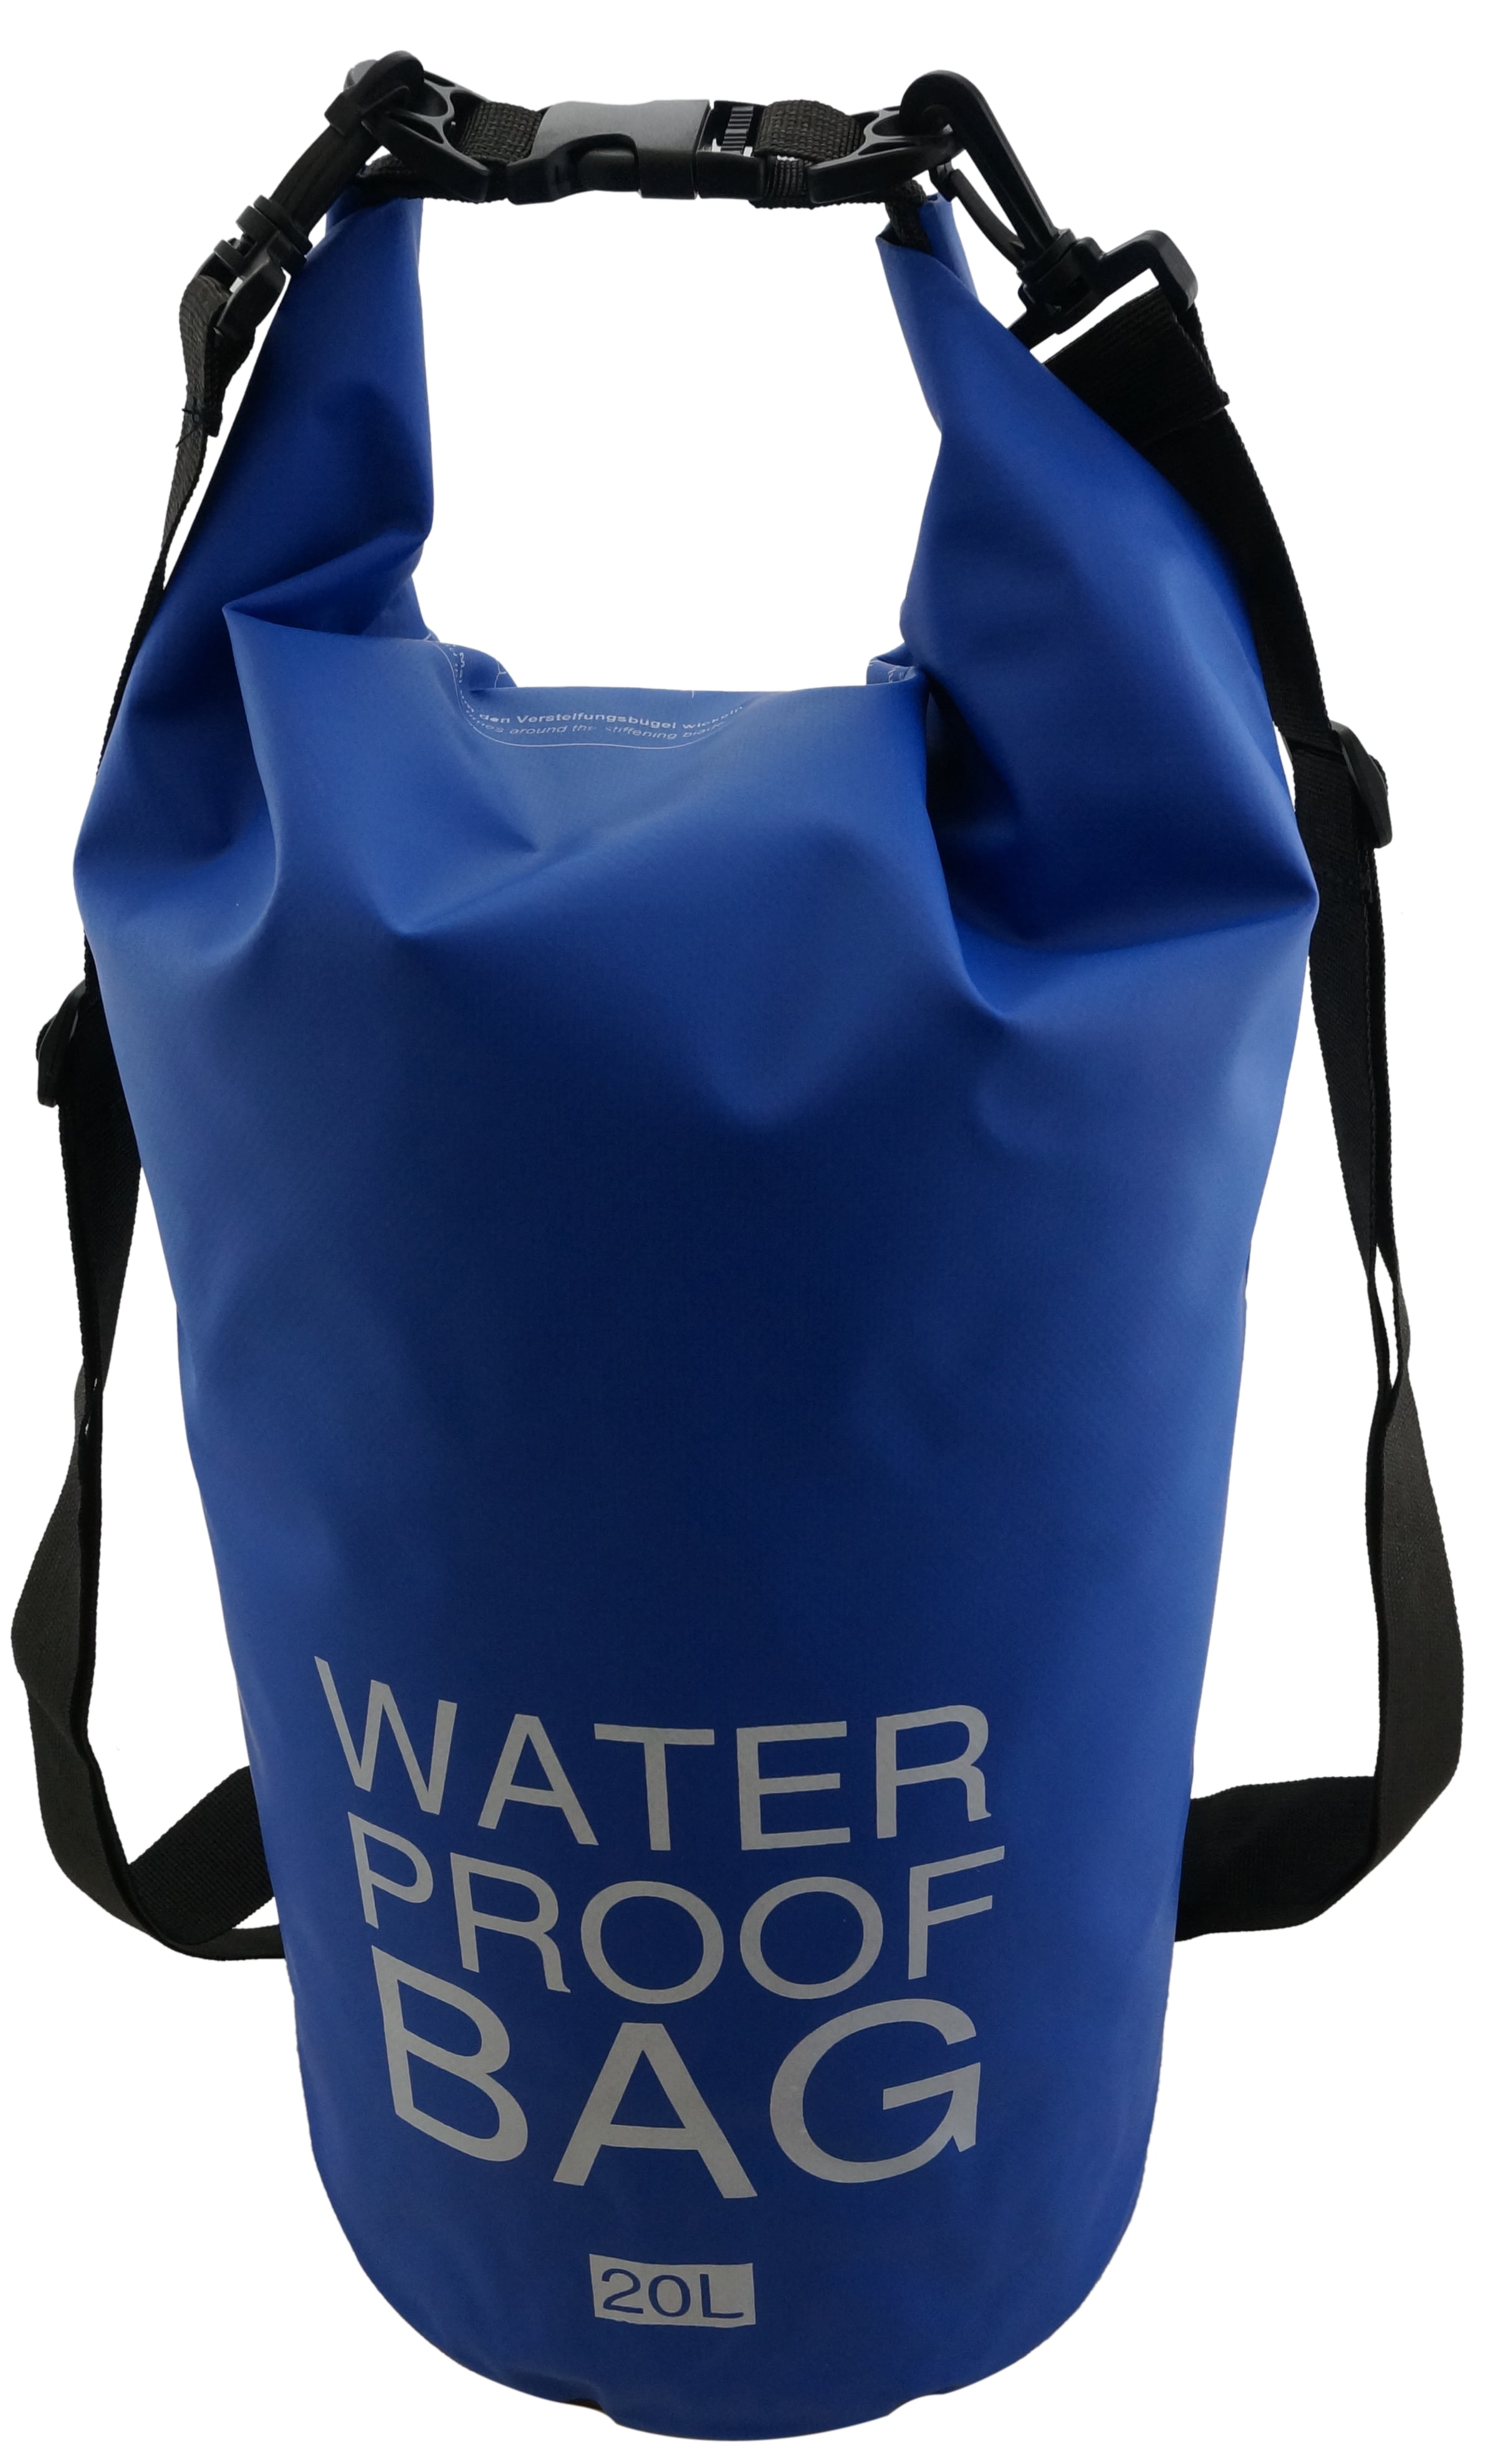 Heavy-Duty PVC Water Proof Dry Bag Sack for Kayaking/Boating/Canoeing/Fishing 